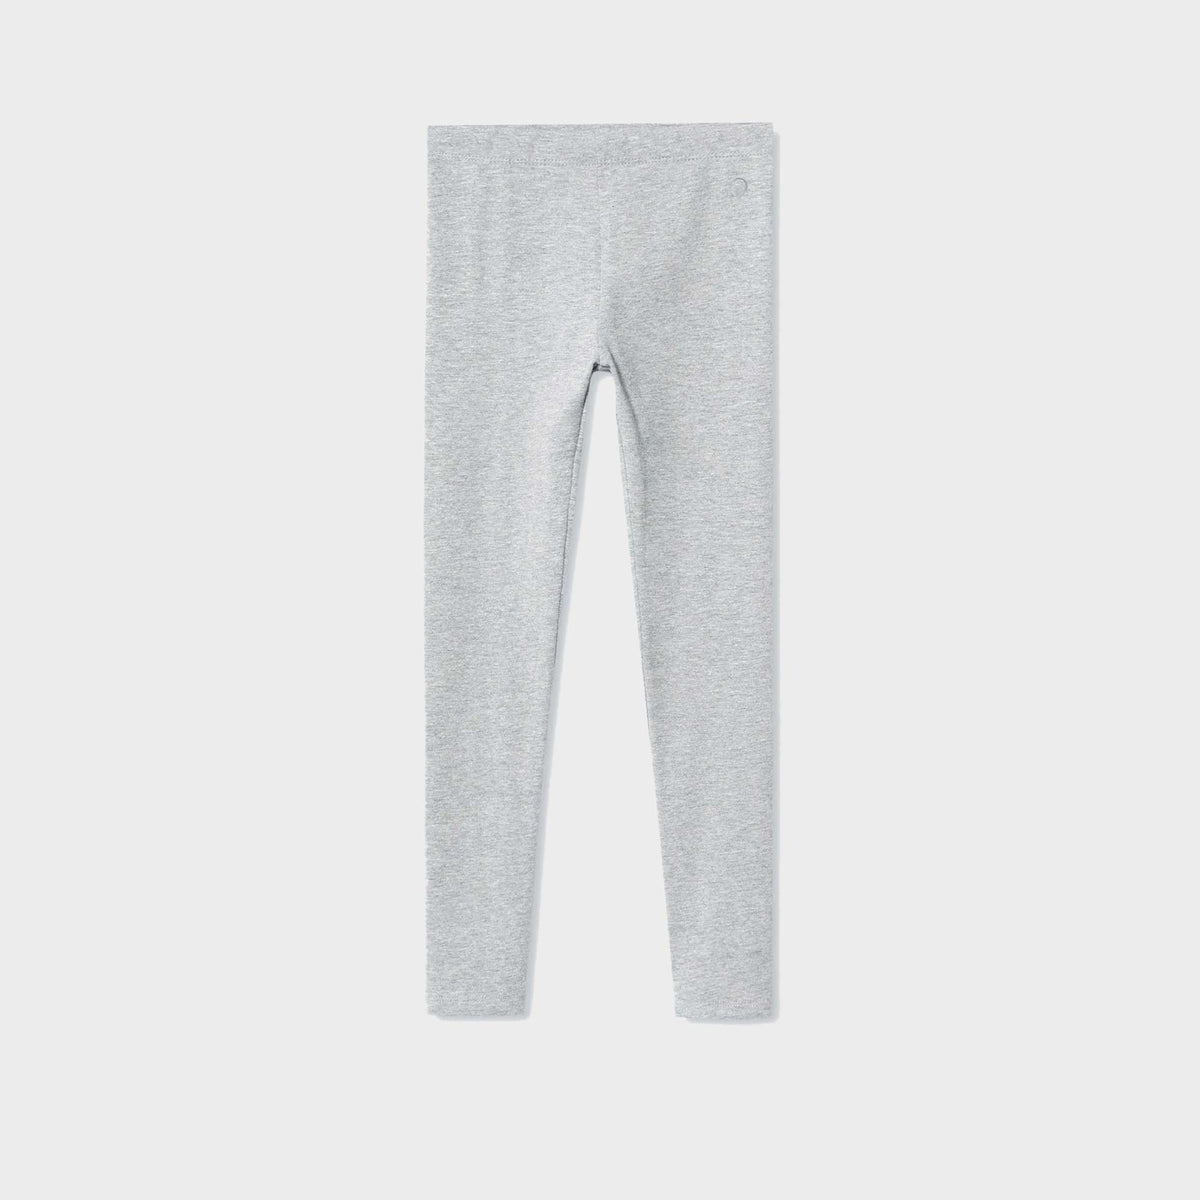 Imported Soft Cotton Grey Legging For Girls